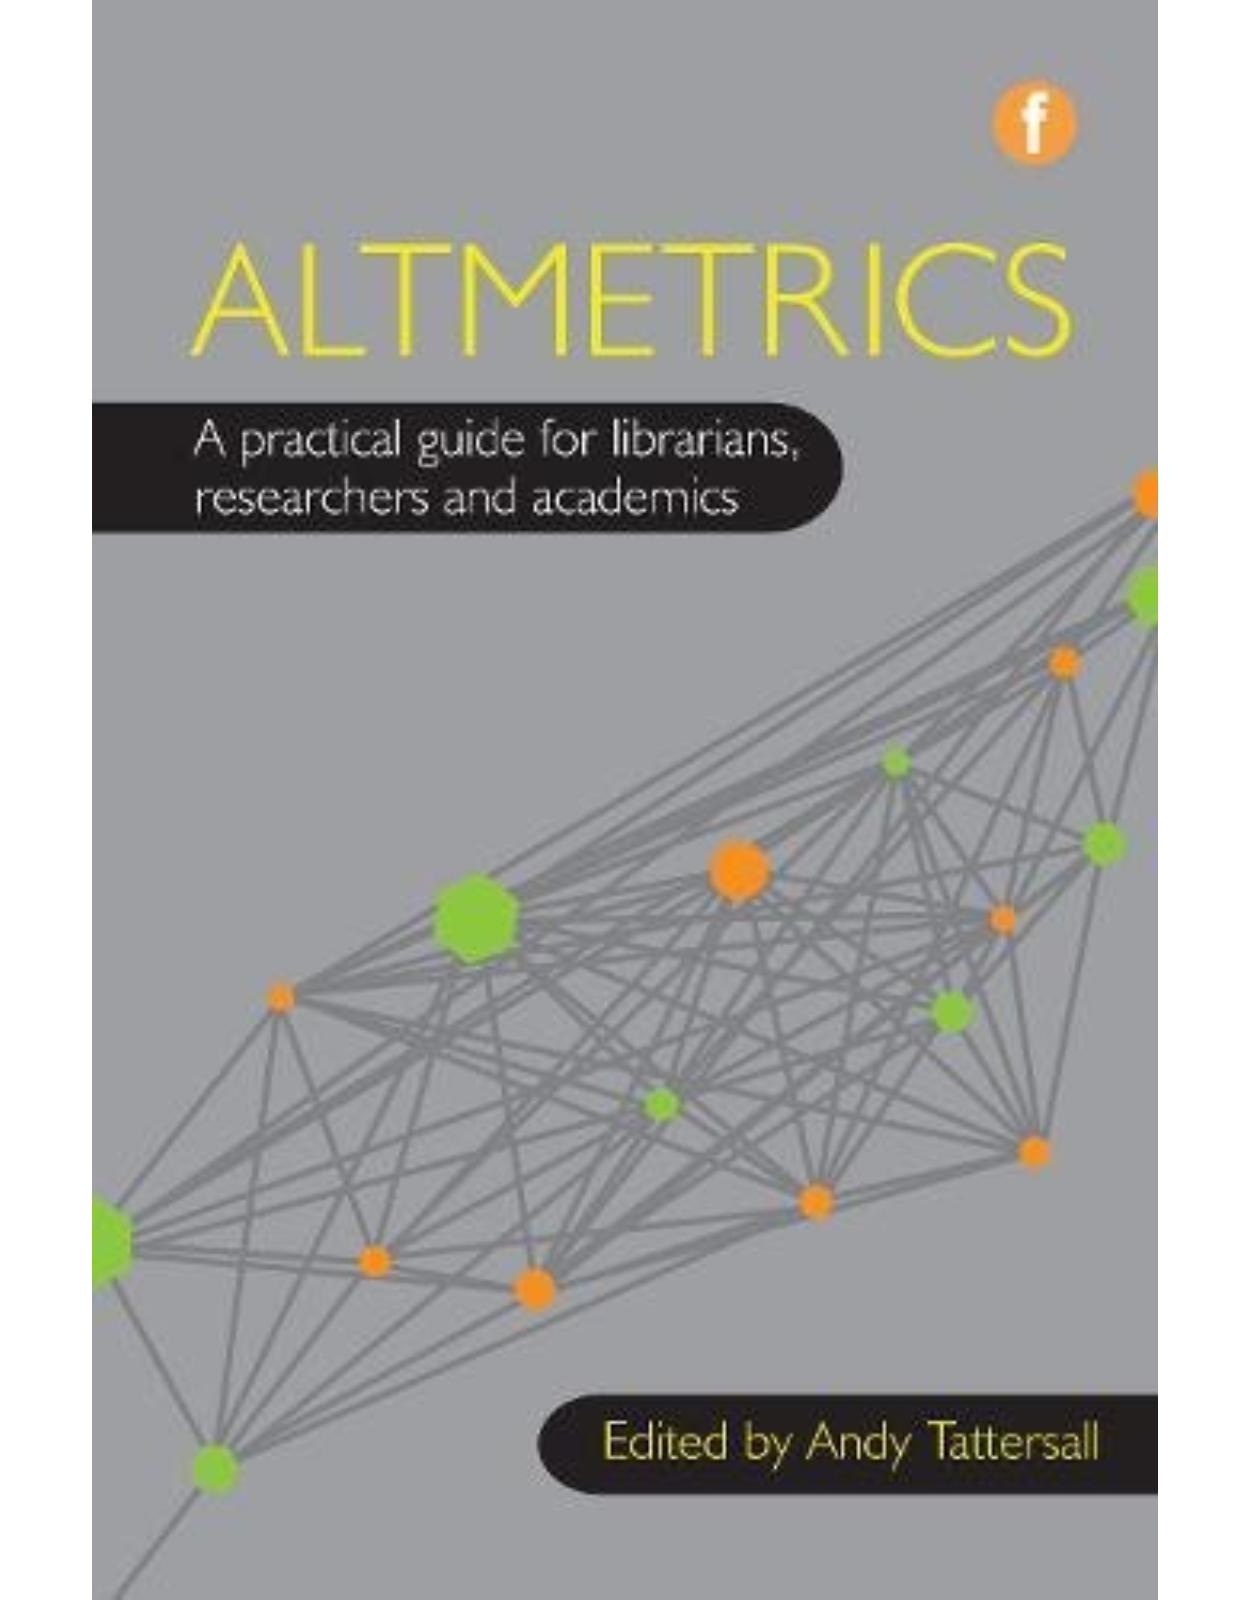 Altmetrics: A practical guide for librarians, researchers and academics